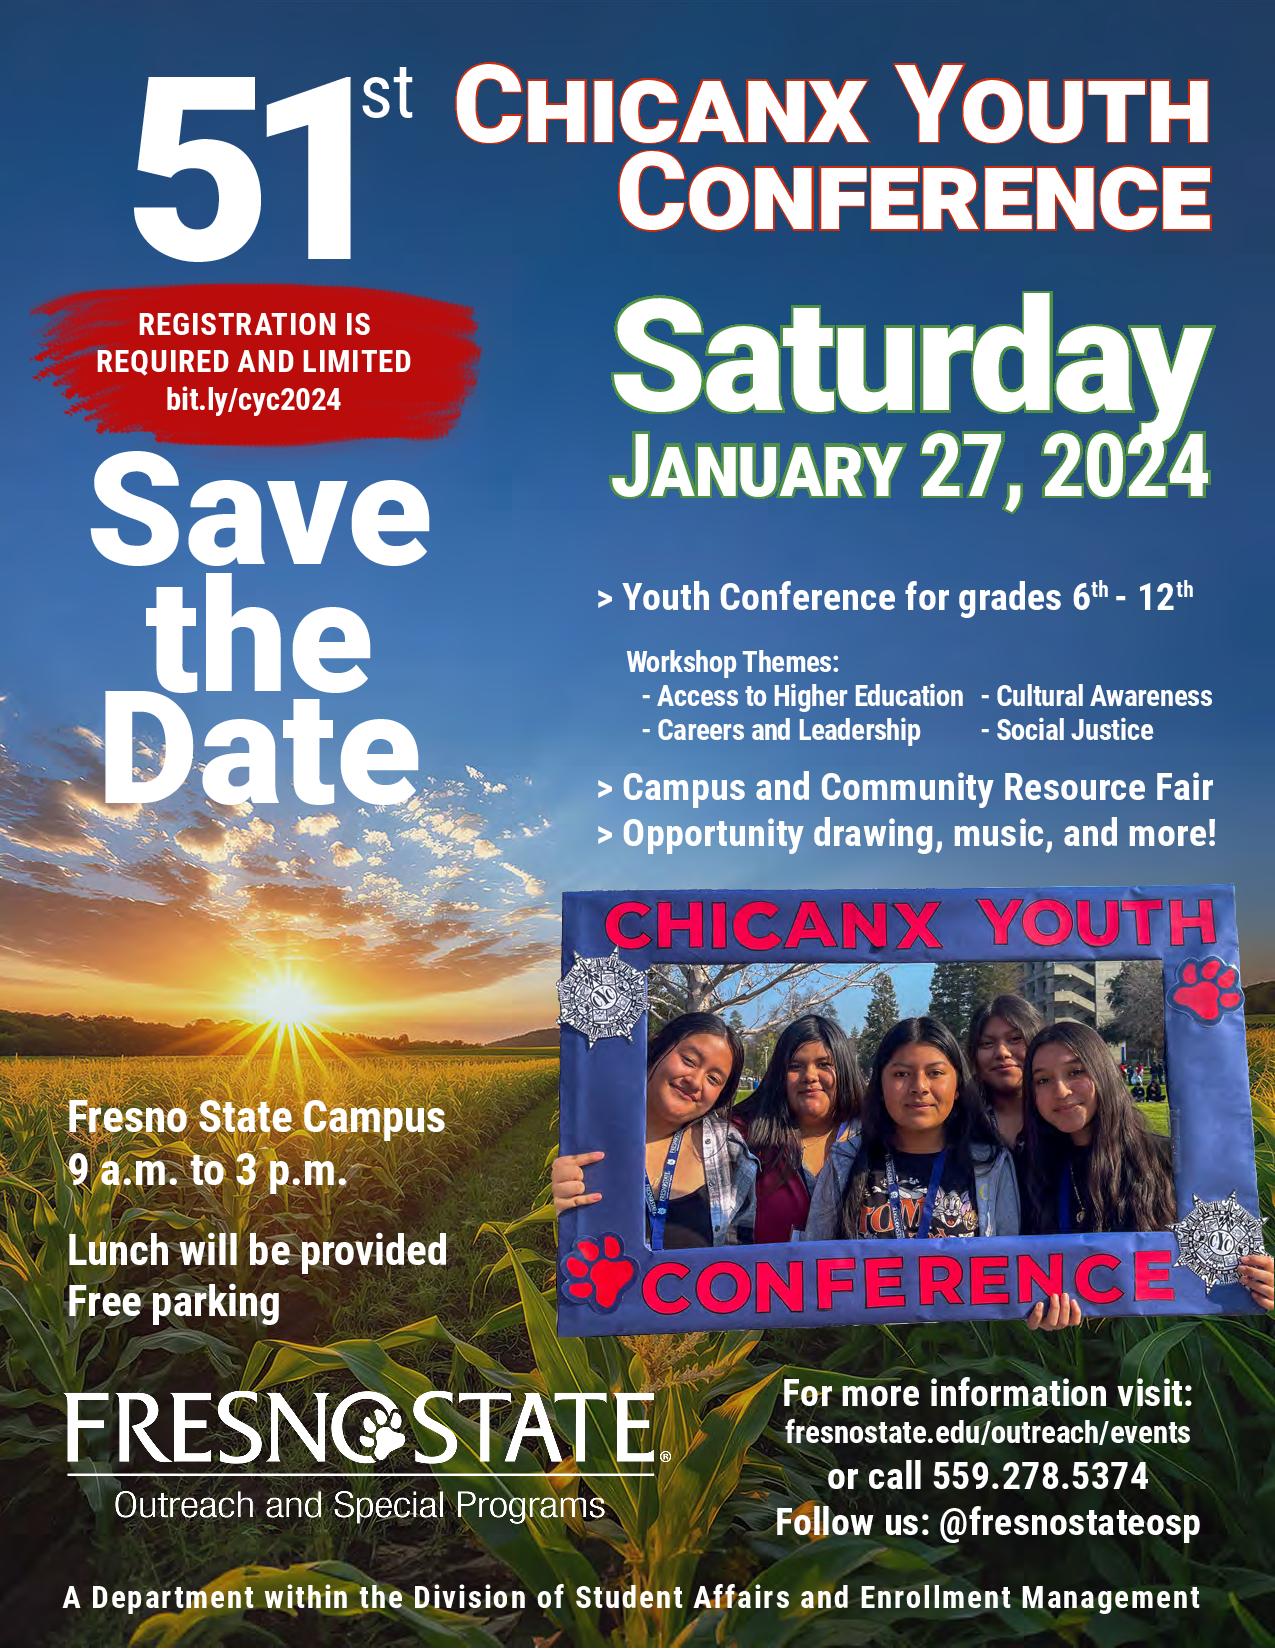 save the date flyer for chicanx youth conference on saturday, january, 27, 2024 in the satellite student union from 9 a.m. to 3 p.m.